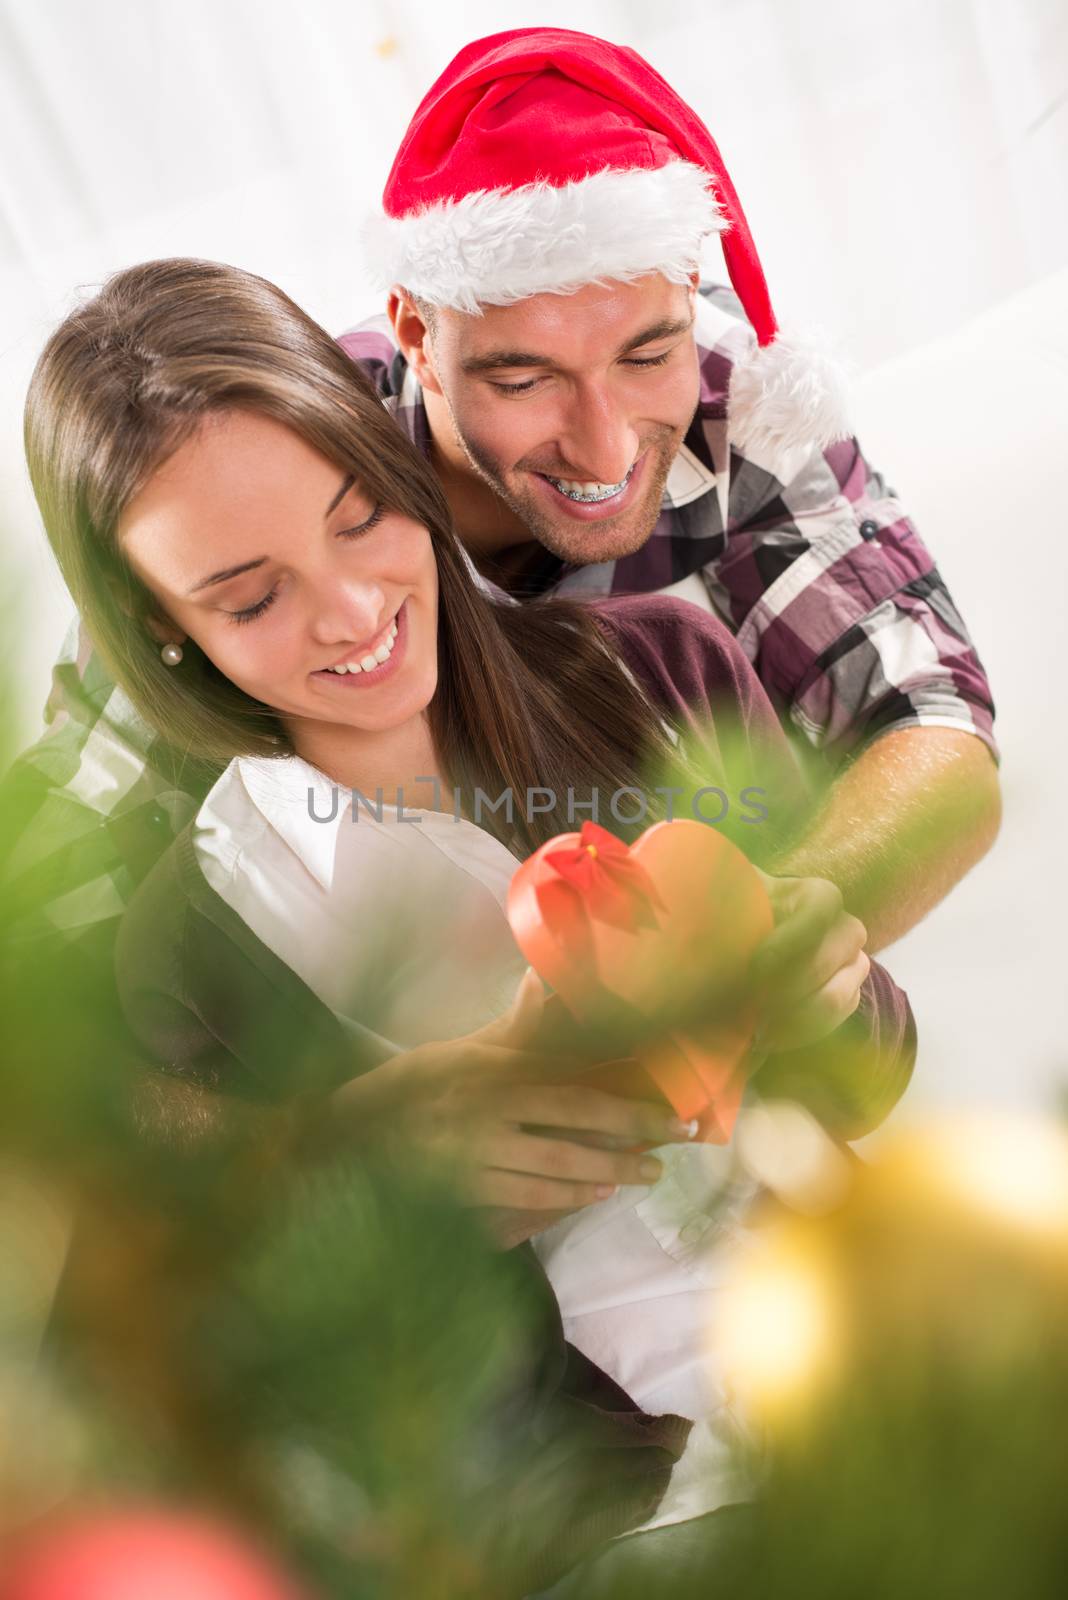 Young man gives his girlfriend a Christmas gift. She is happy while opening gift box.